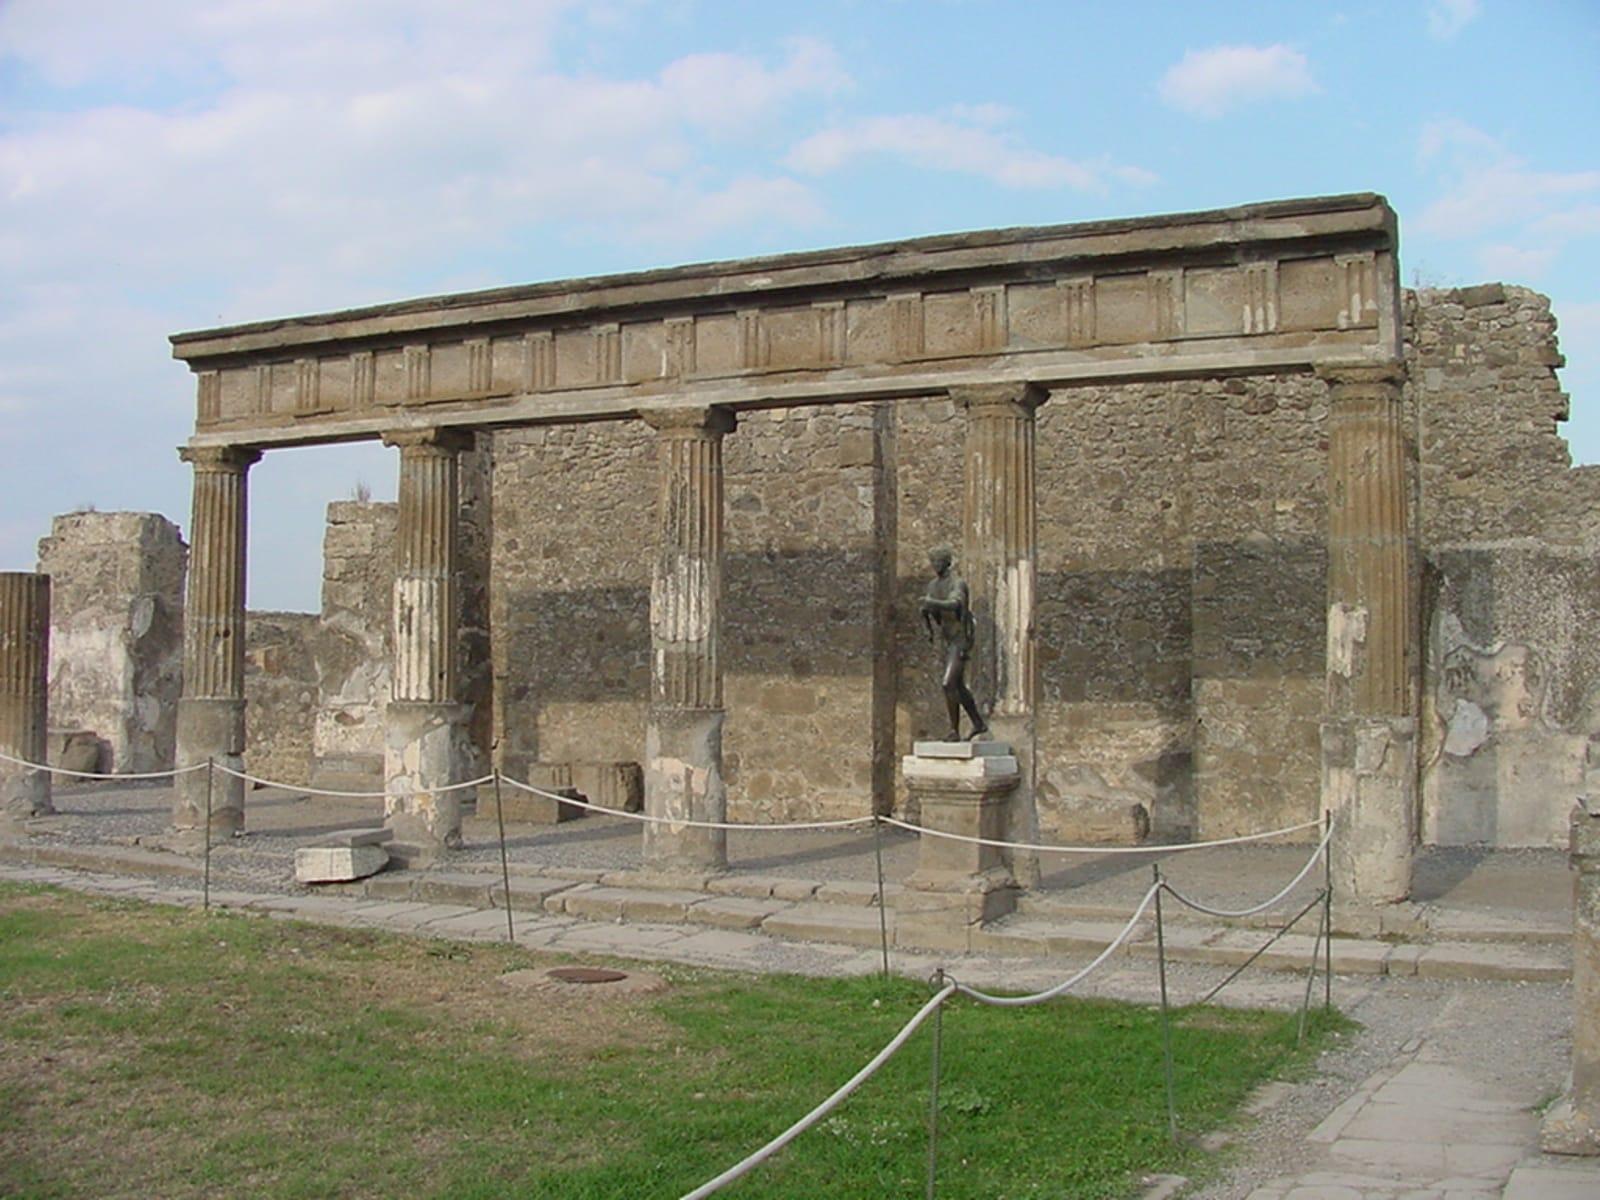 The Ruins of Pompeii Archeological Site